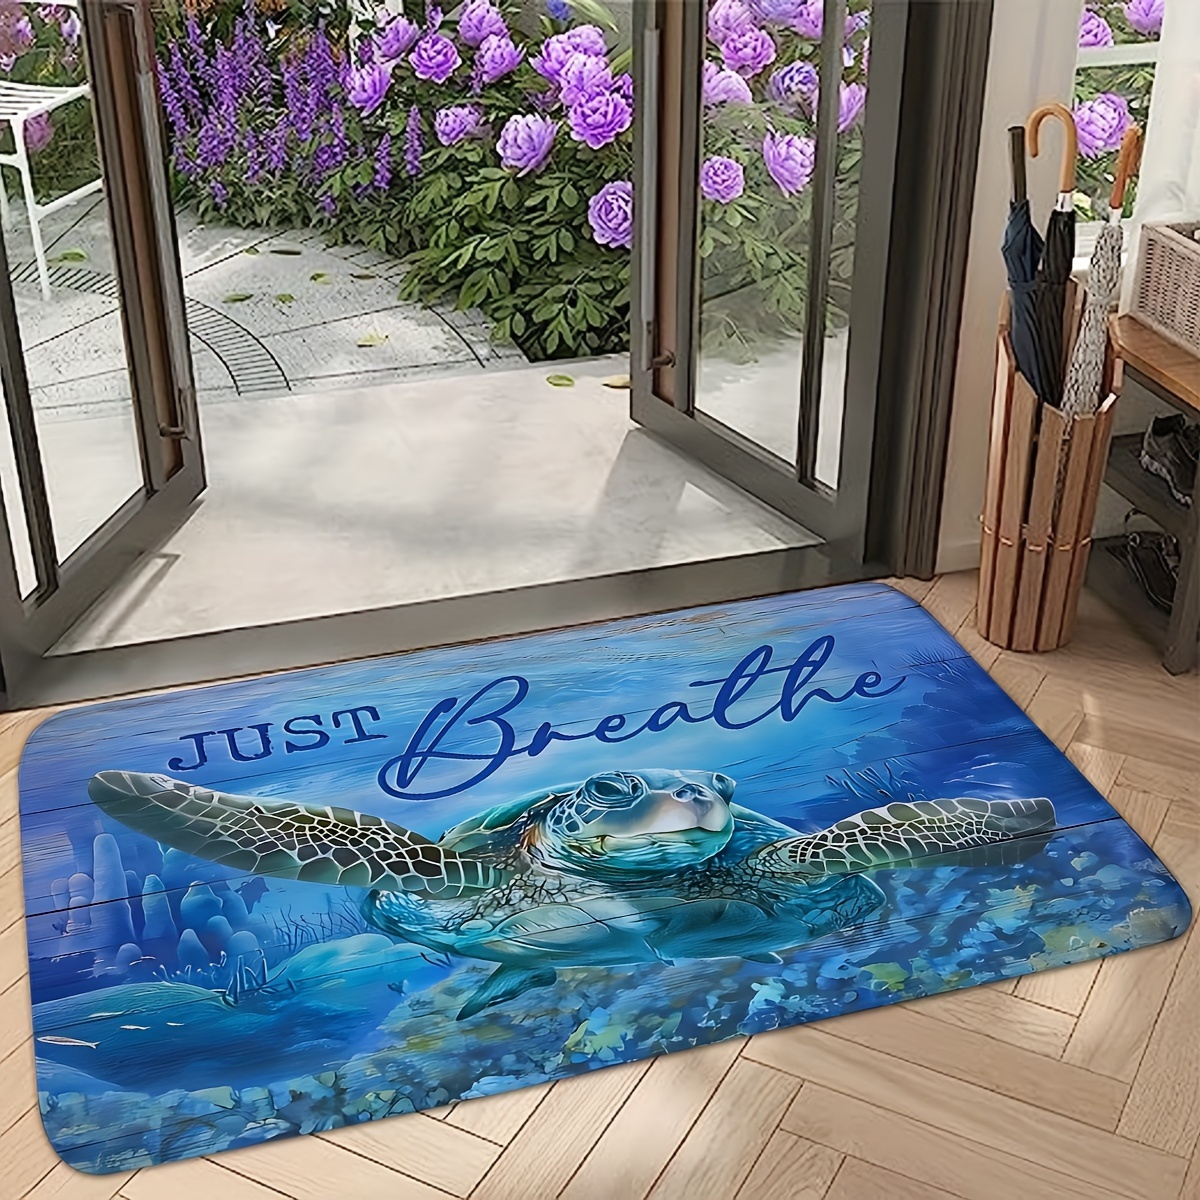 

Non-slip Polyester Rug Pads With Sea Turtle Design - Machine Washable, Braided Rectangle Rug For Bathroom, Indoor Entry, Kitchen Floor Mat, Medium Pile, Machine Made - Multiple Sizes Available